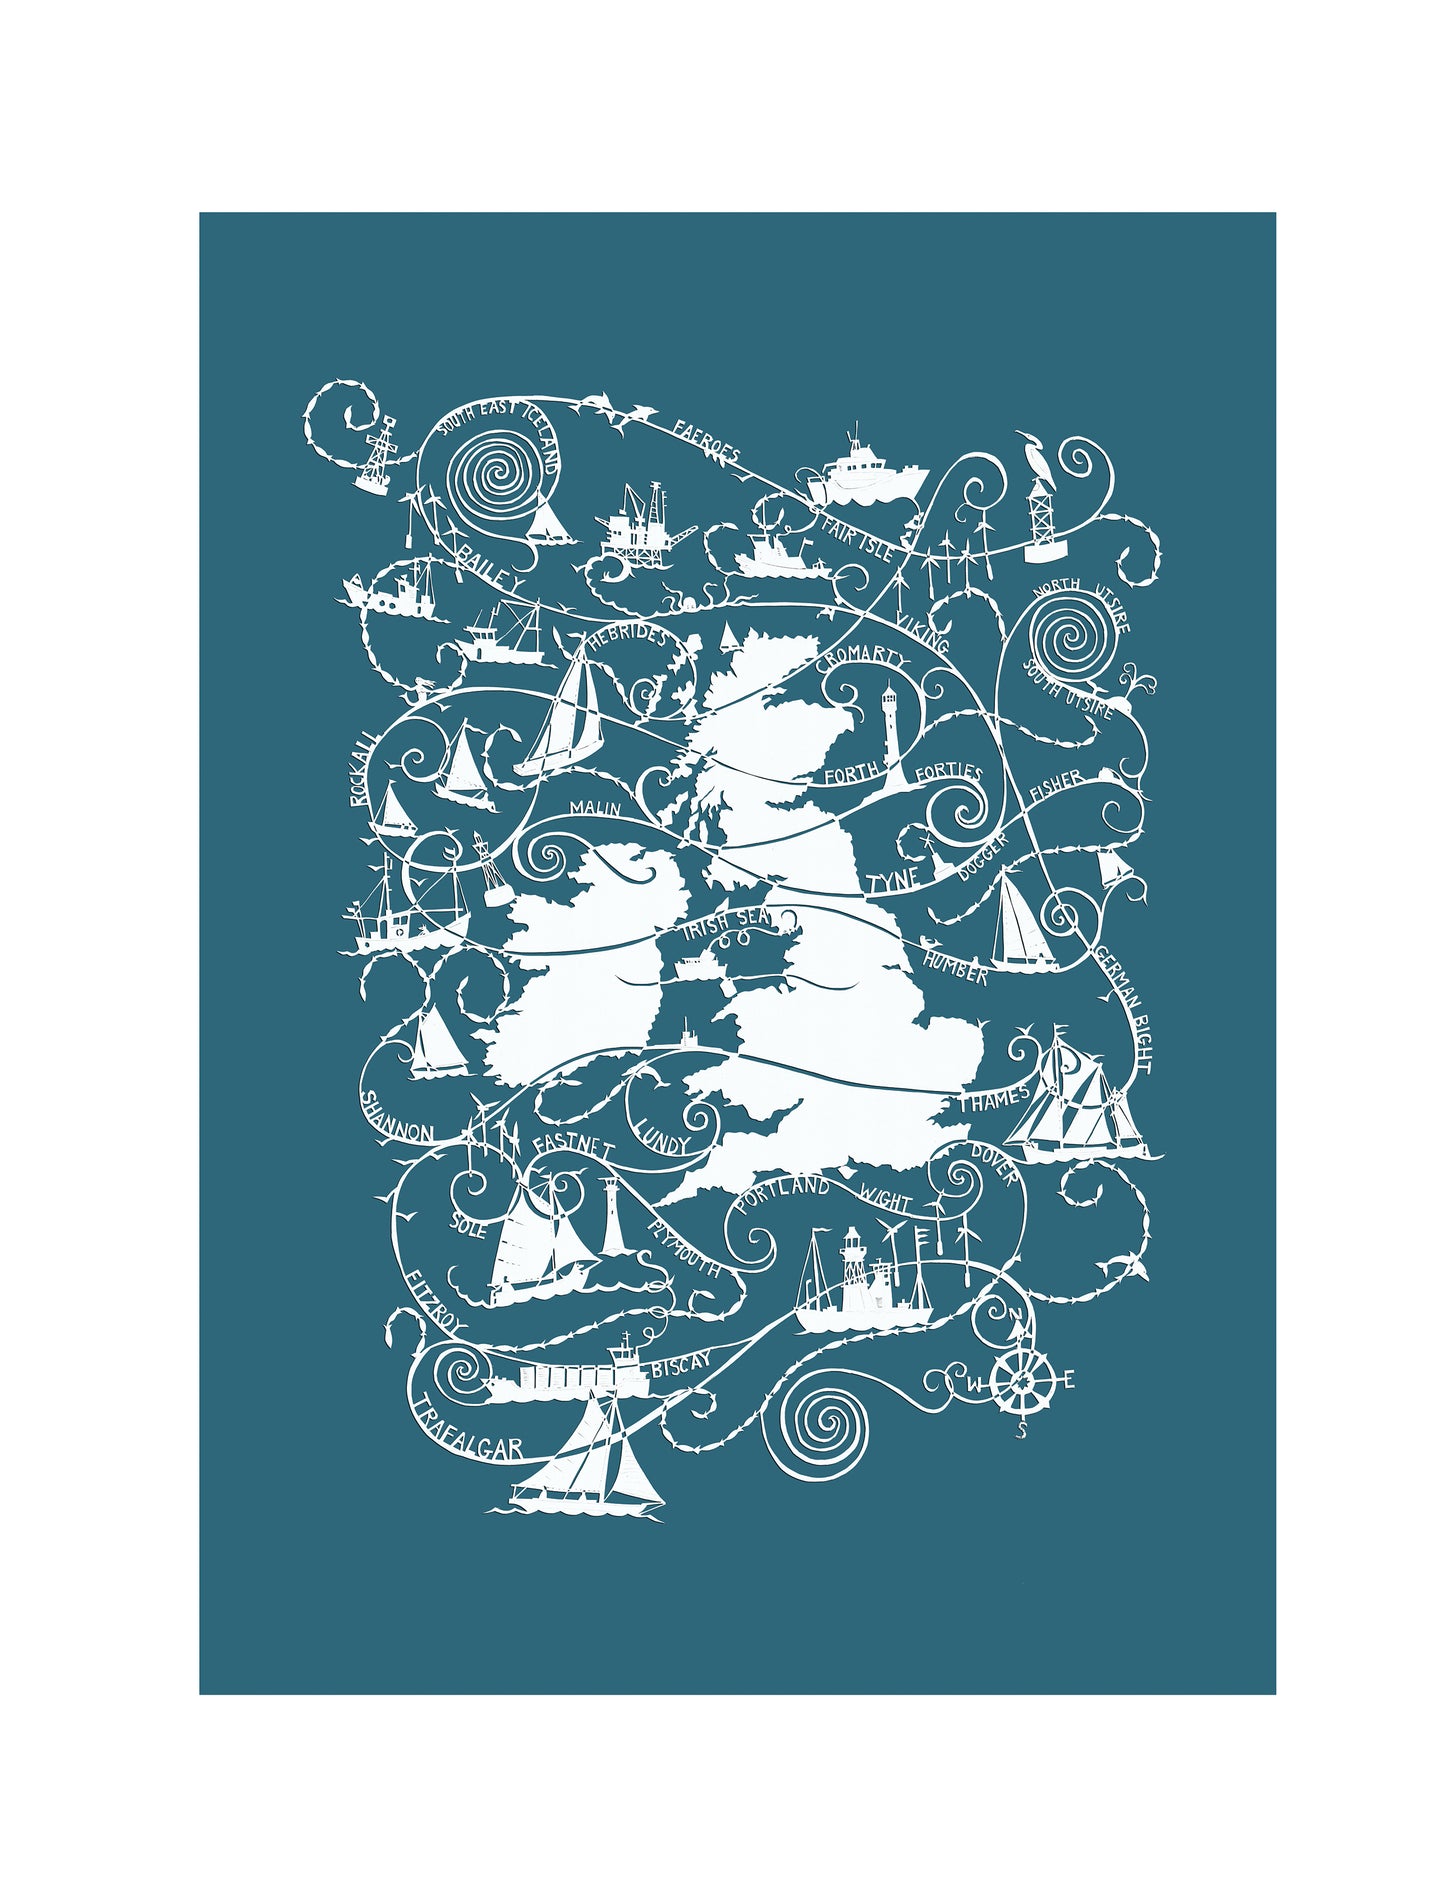 An image of a papercut  map of UK and shipping forecast names, white on a dark turquoise background.